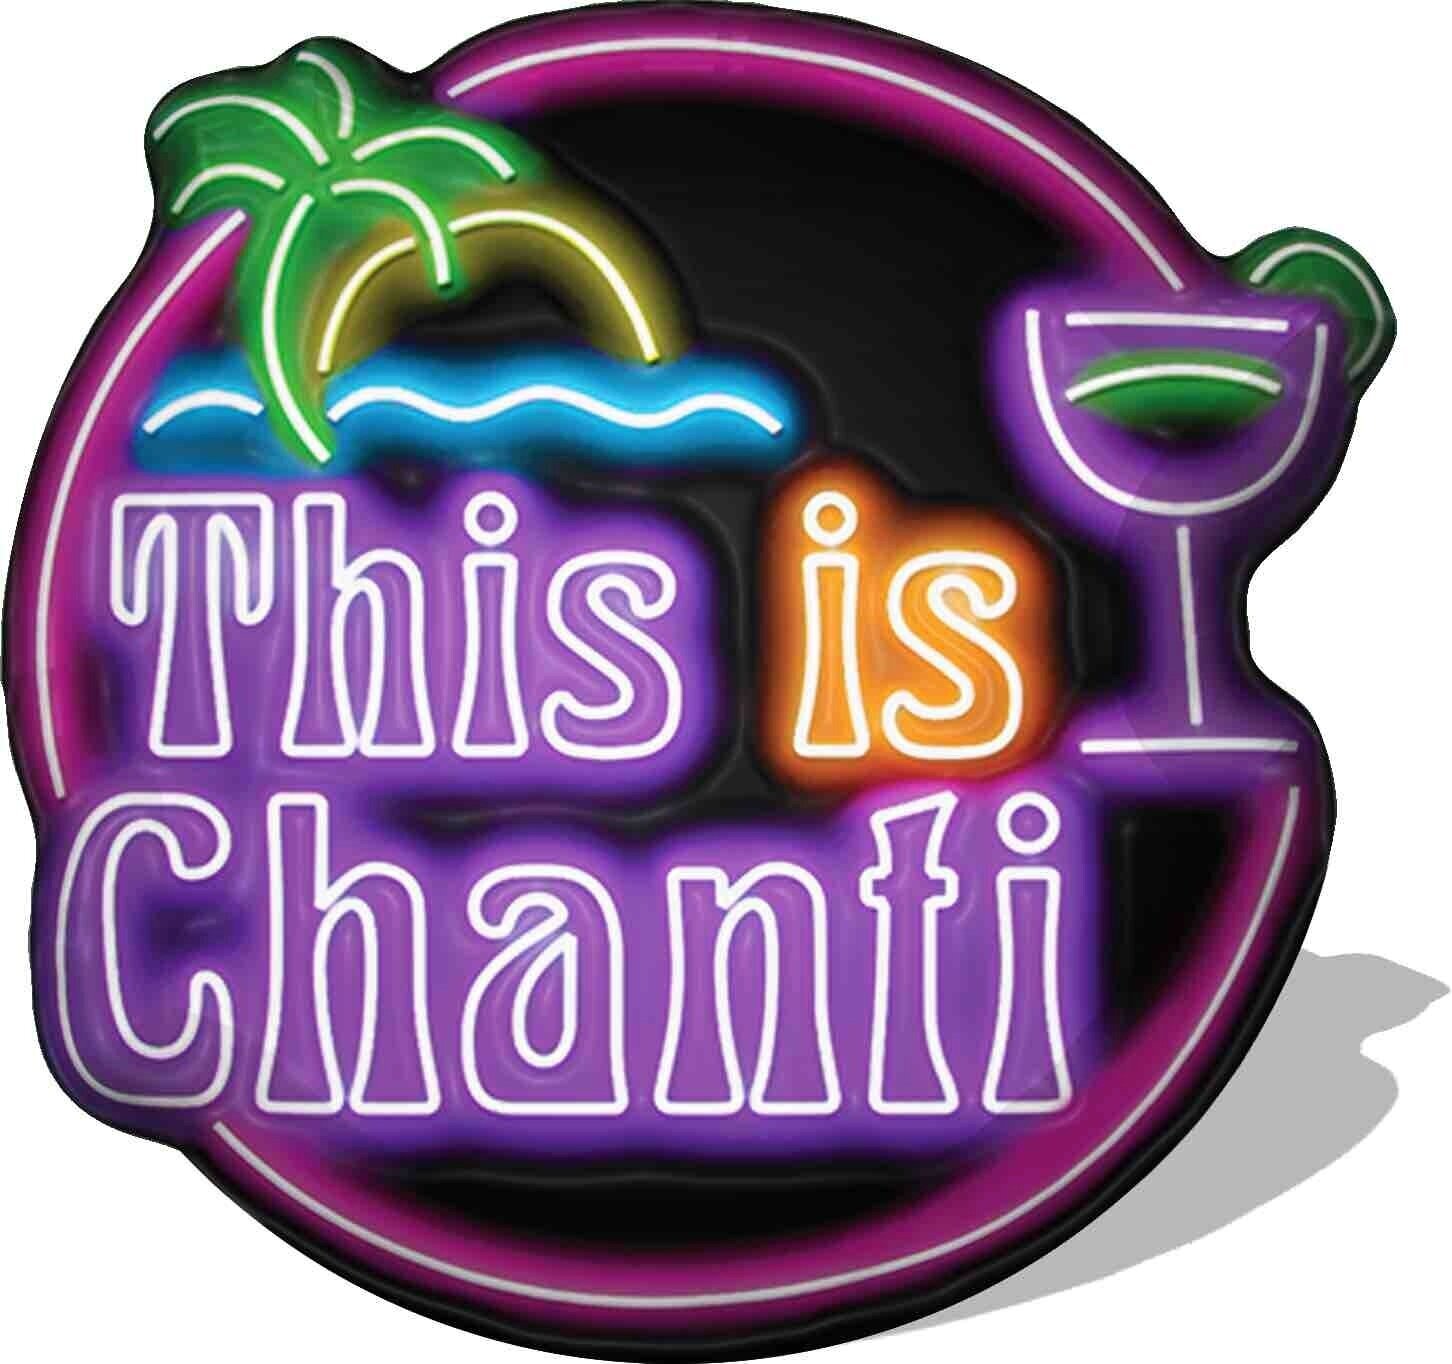 This is Chanti